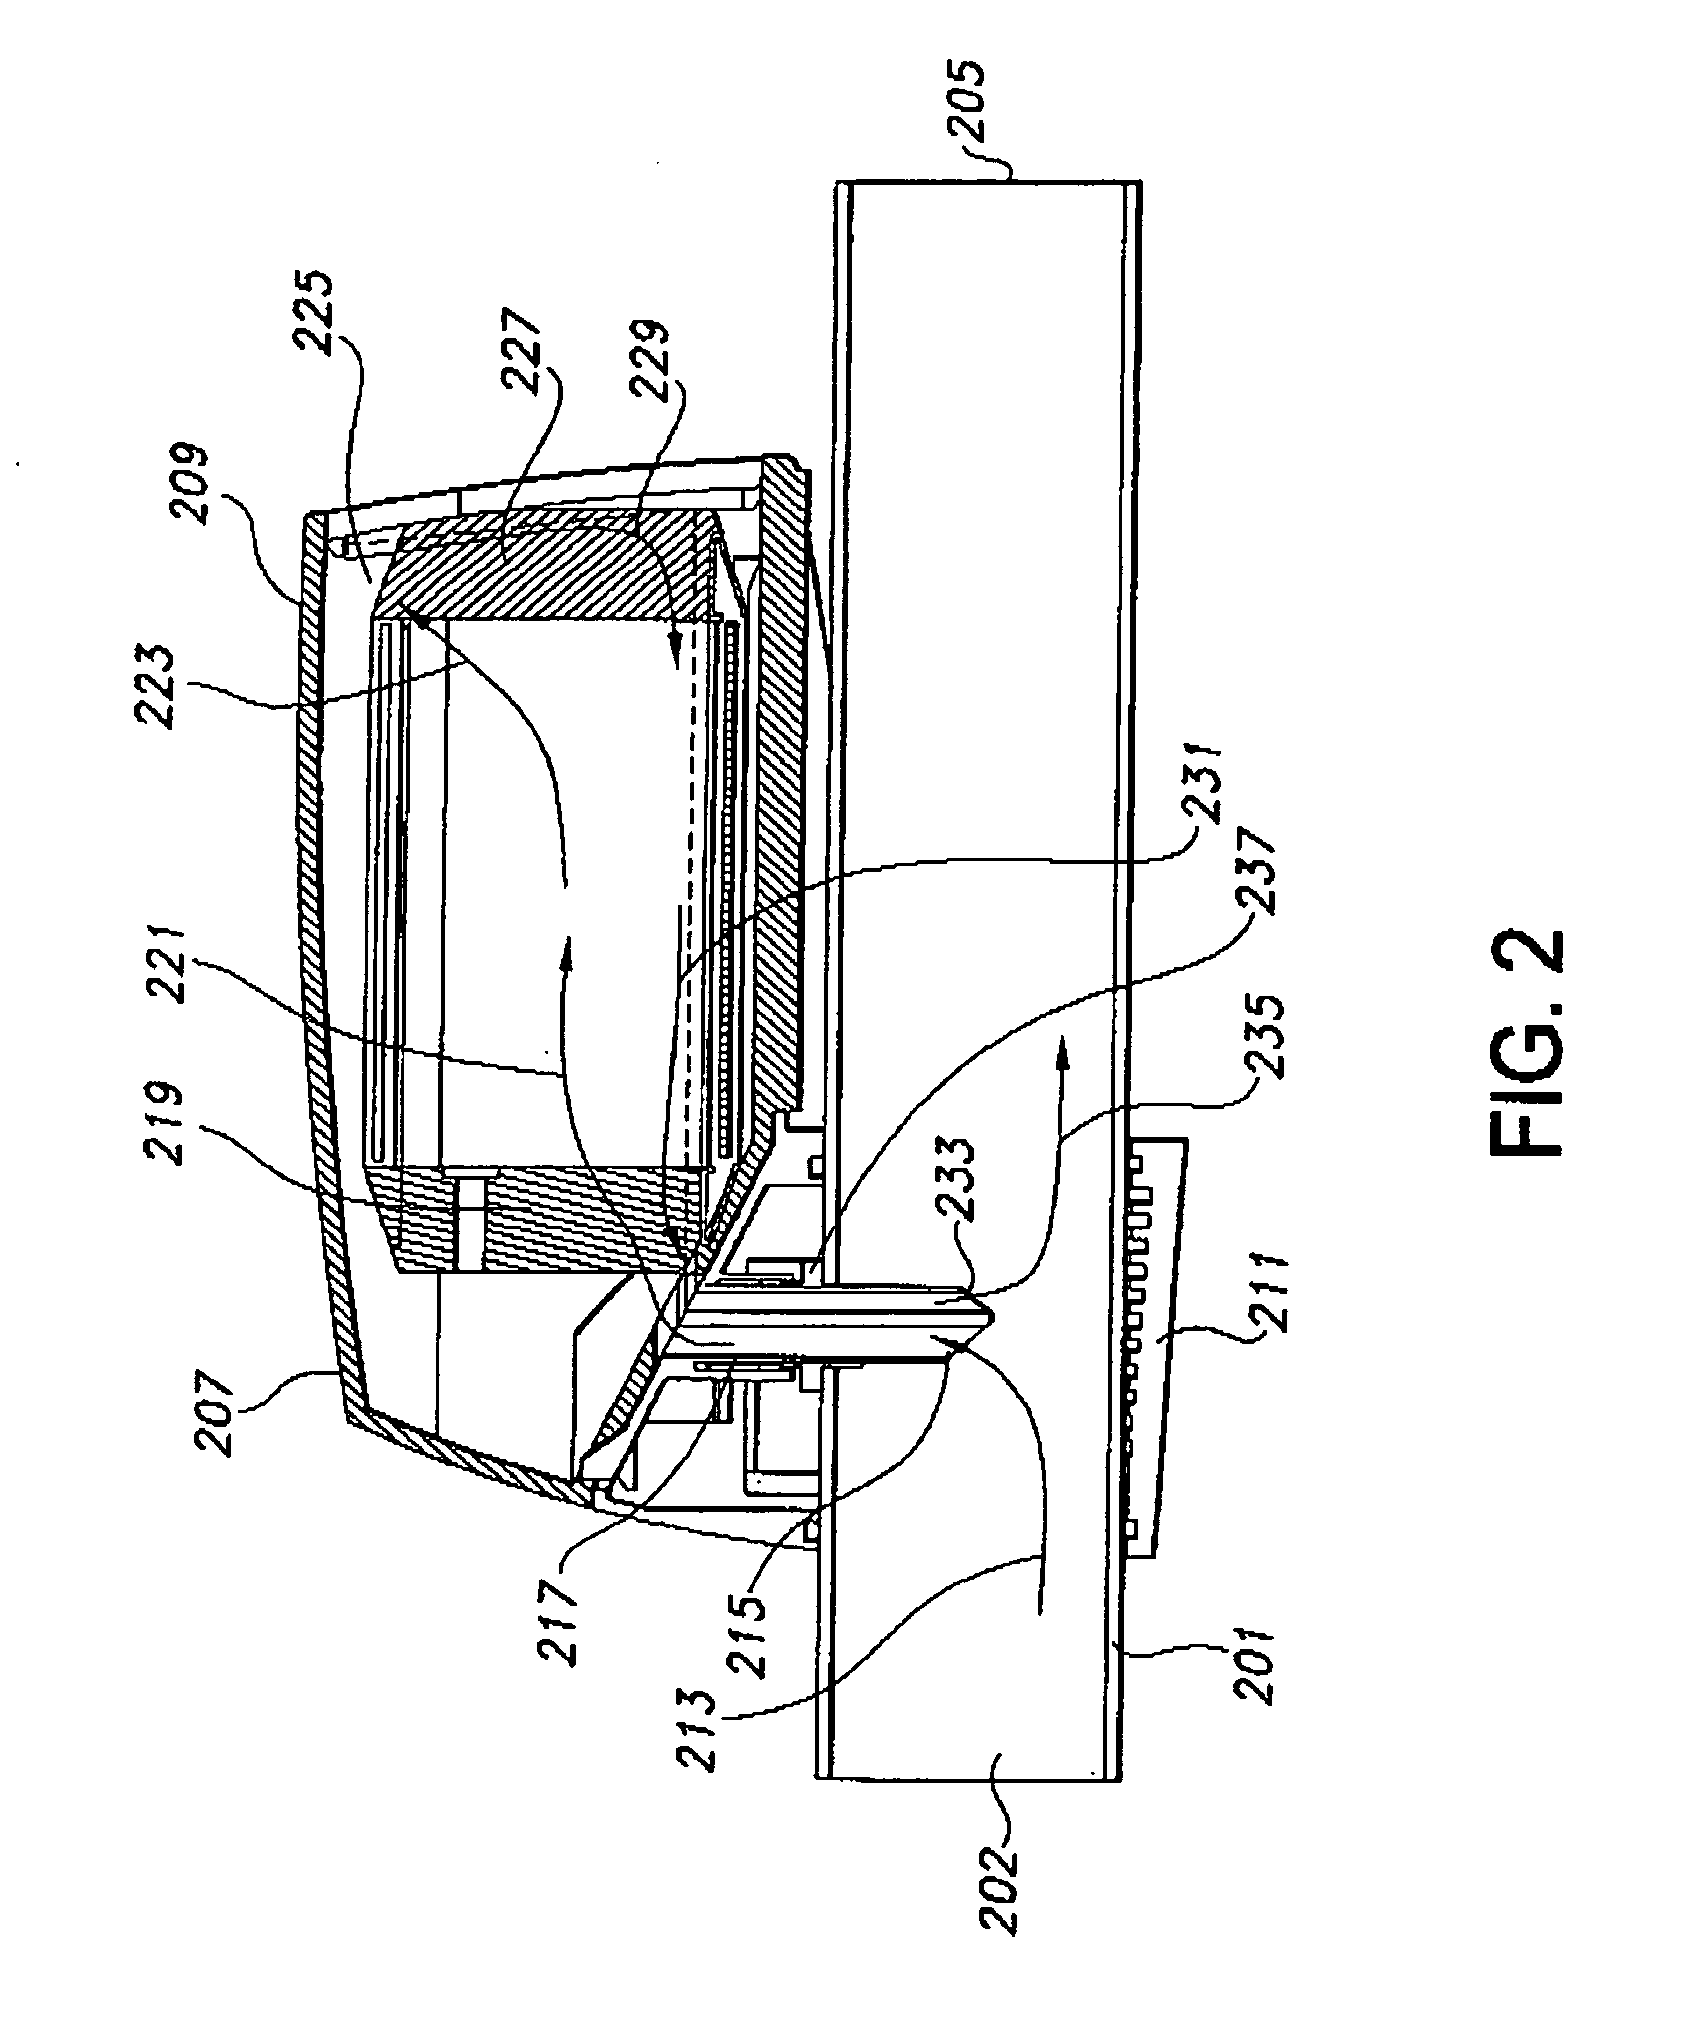 Vessel and method for water treatment